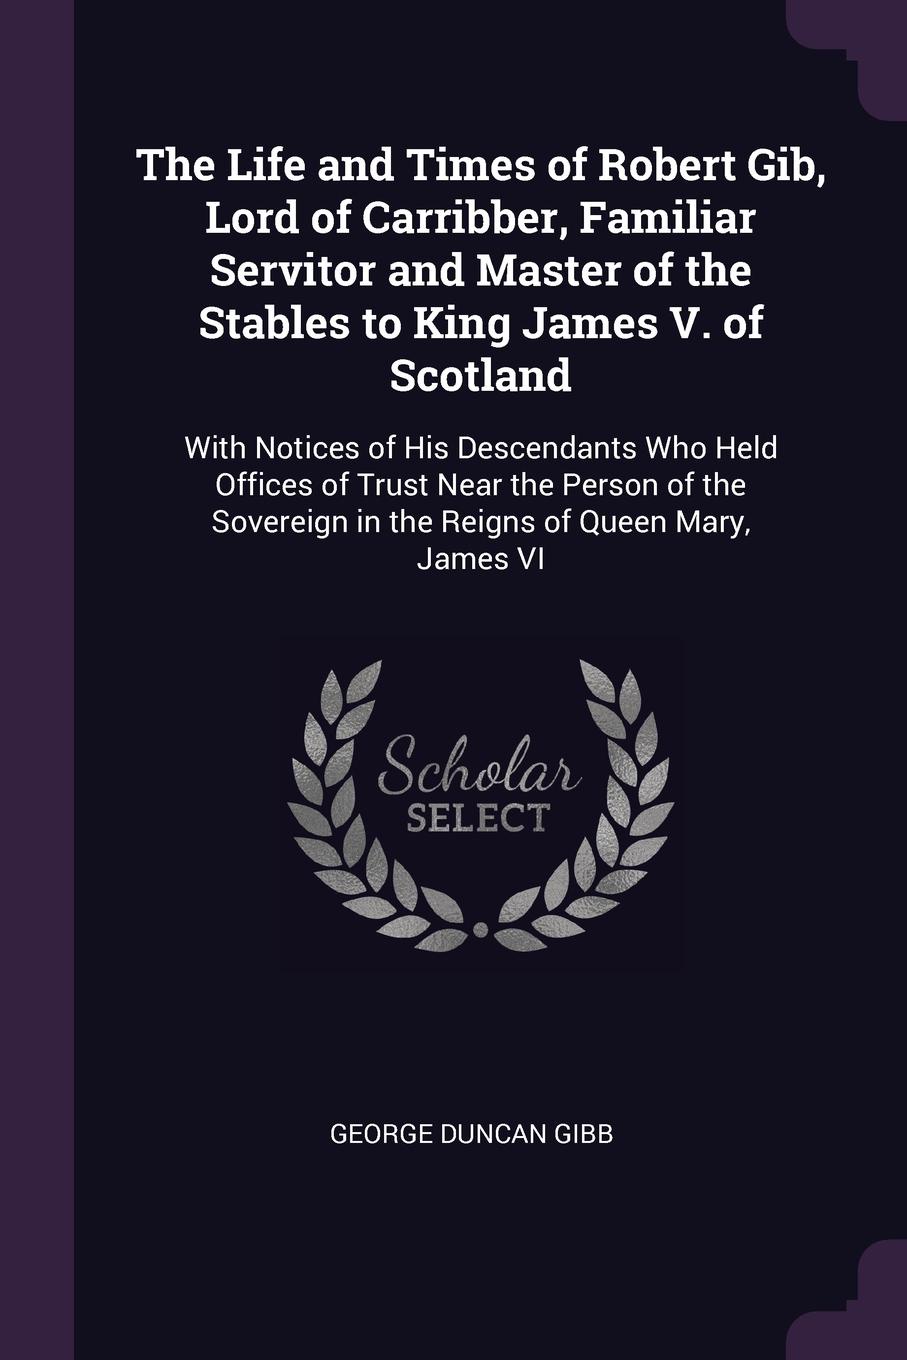 The Life and Times of Robert Gib, Lord of Carribber, Familiar Servitor and Master of the Stables to King James V. of Scotland. With Notices of His Descendants Who Held Offices of Trust Near the Person of the Sovereign in the Reigns of Queen Mary, ...